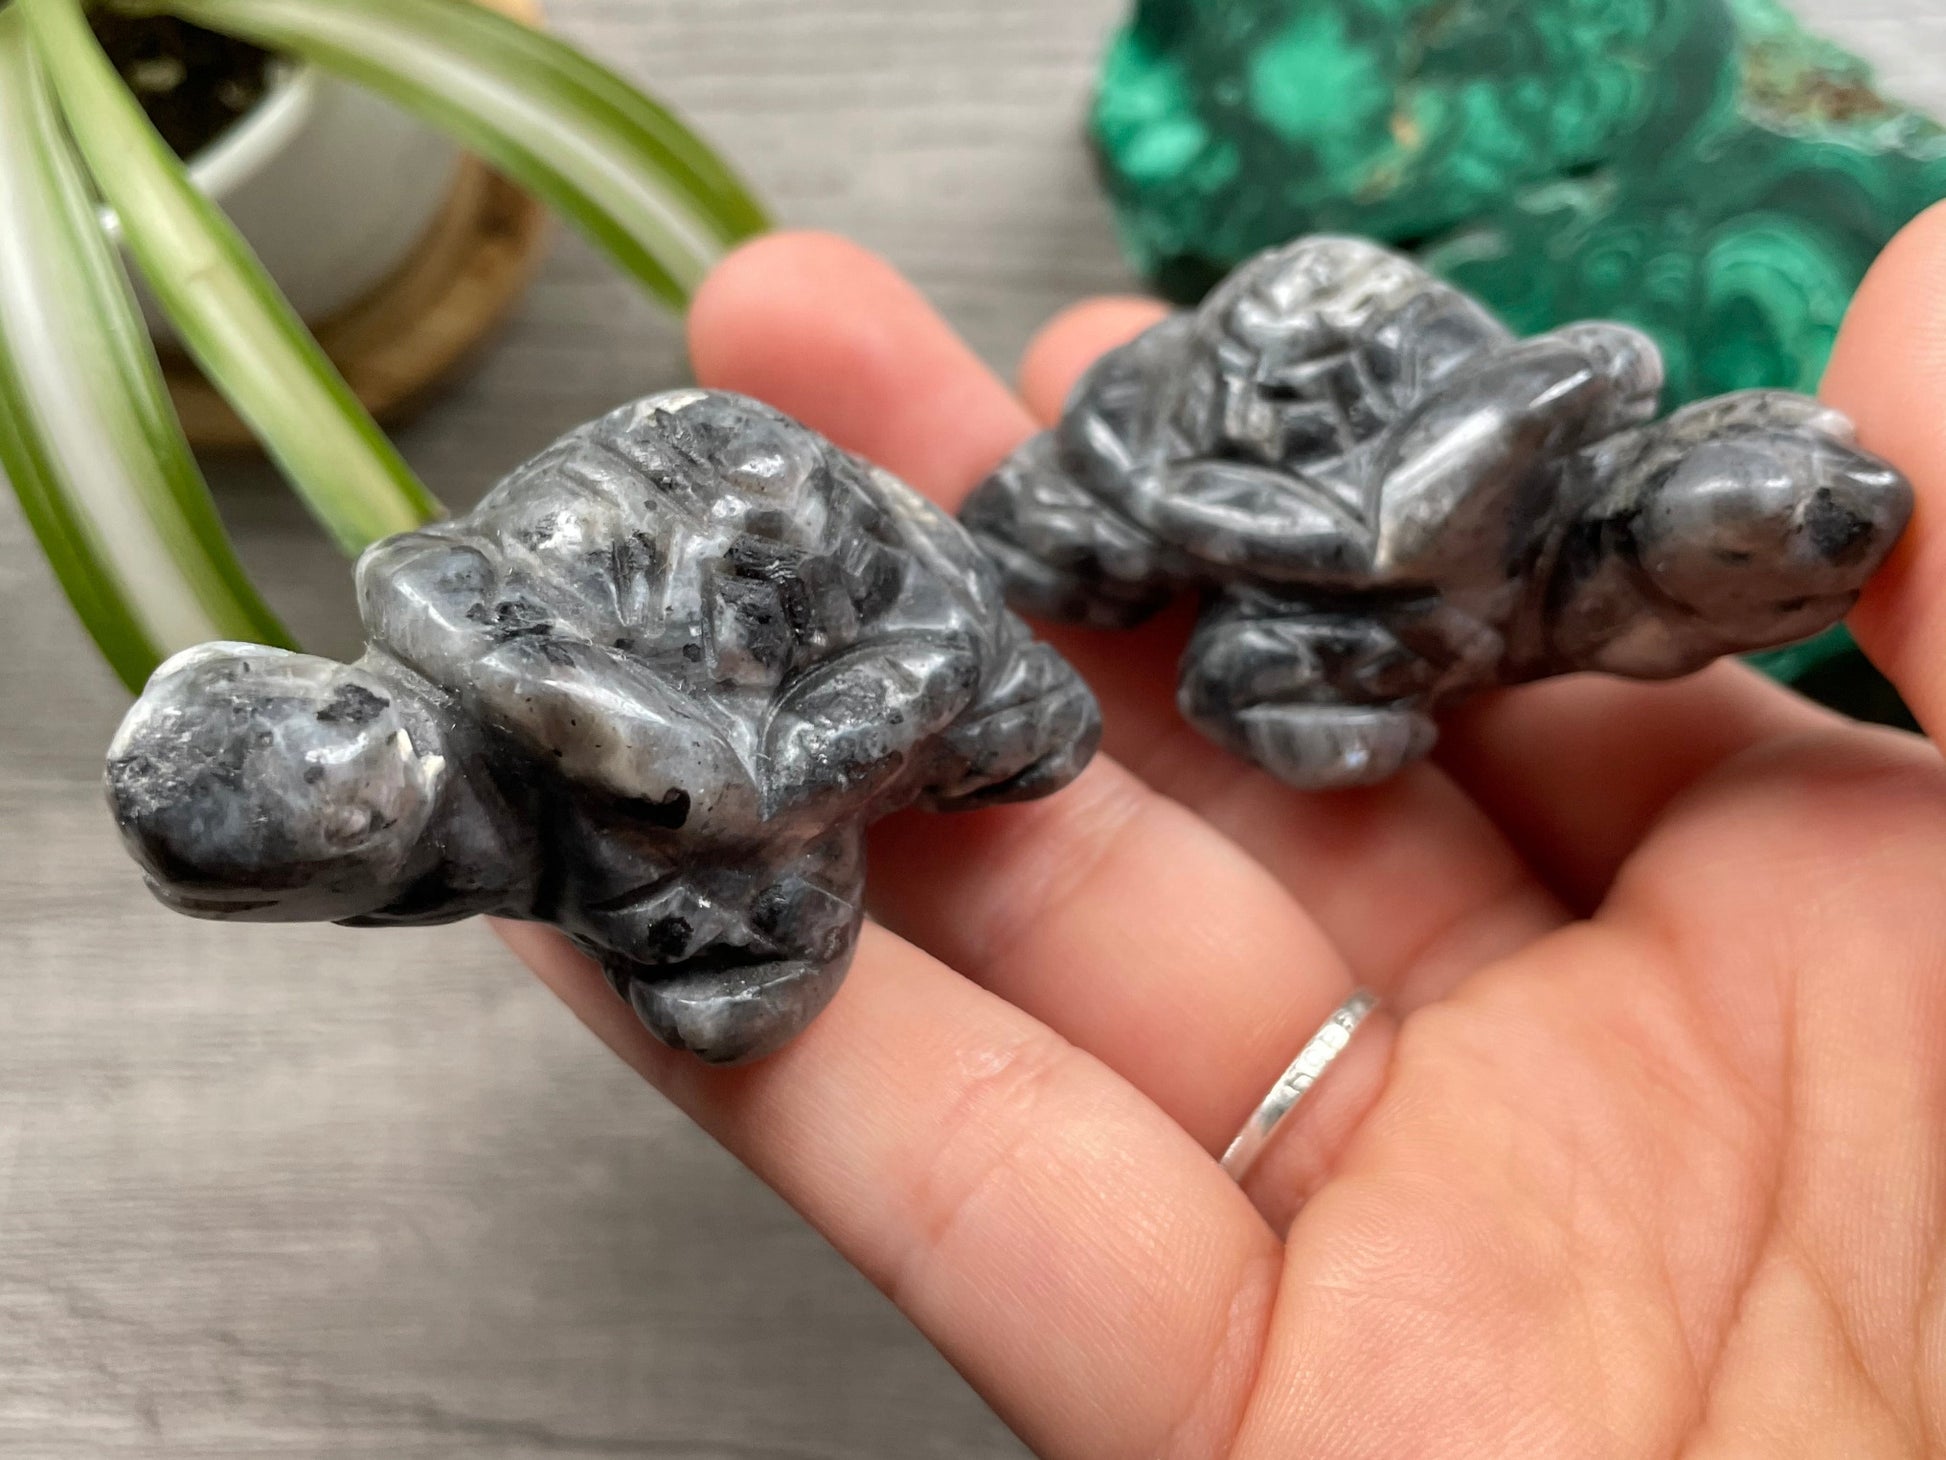 Pictured are turtles carved out of larvikite.